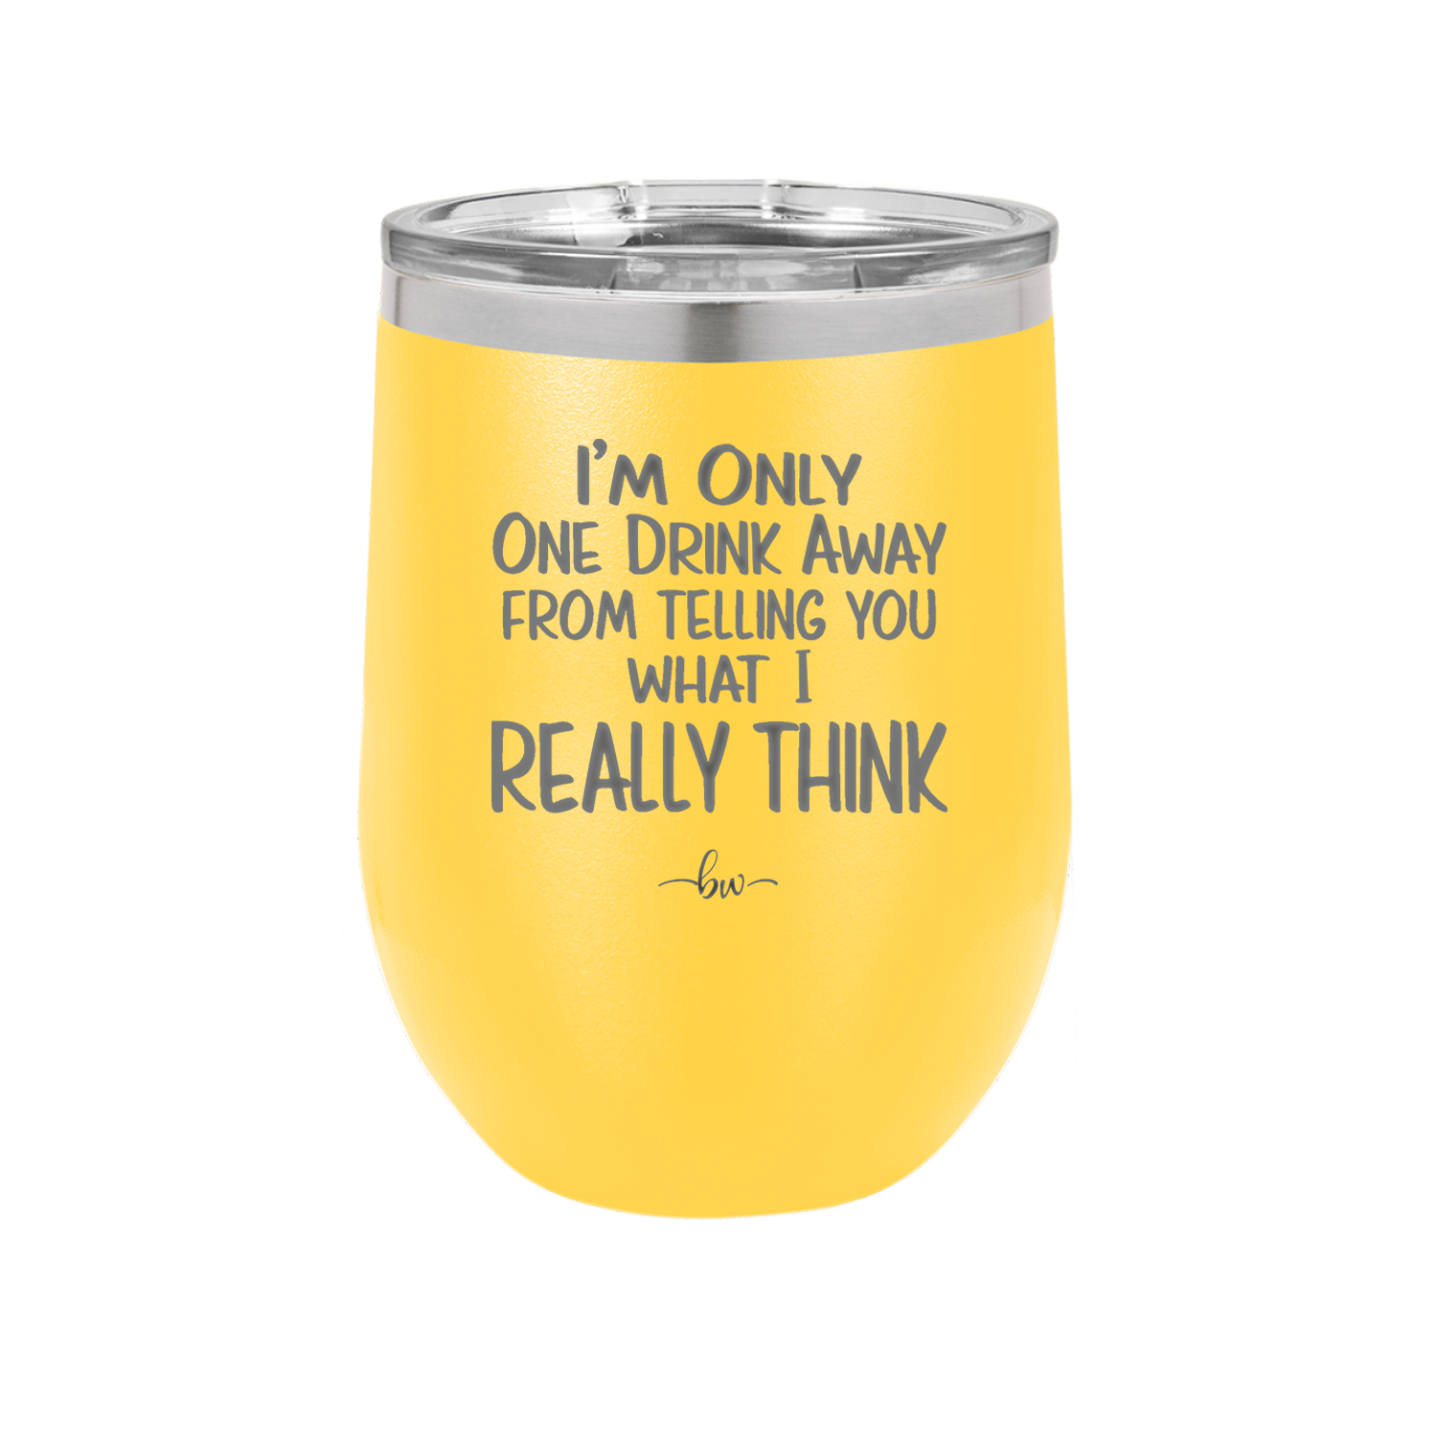 I'm One Drink Away From Telling You What I Really Think - Laser Engraved Stainless Steel Drinkware - 1308 -